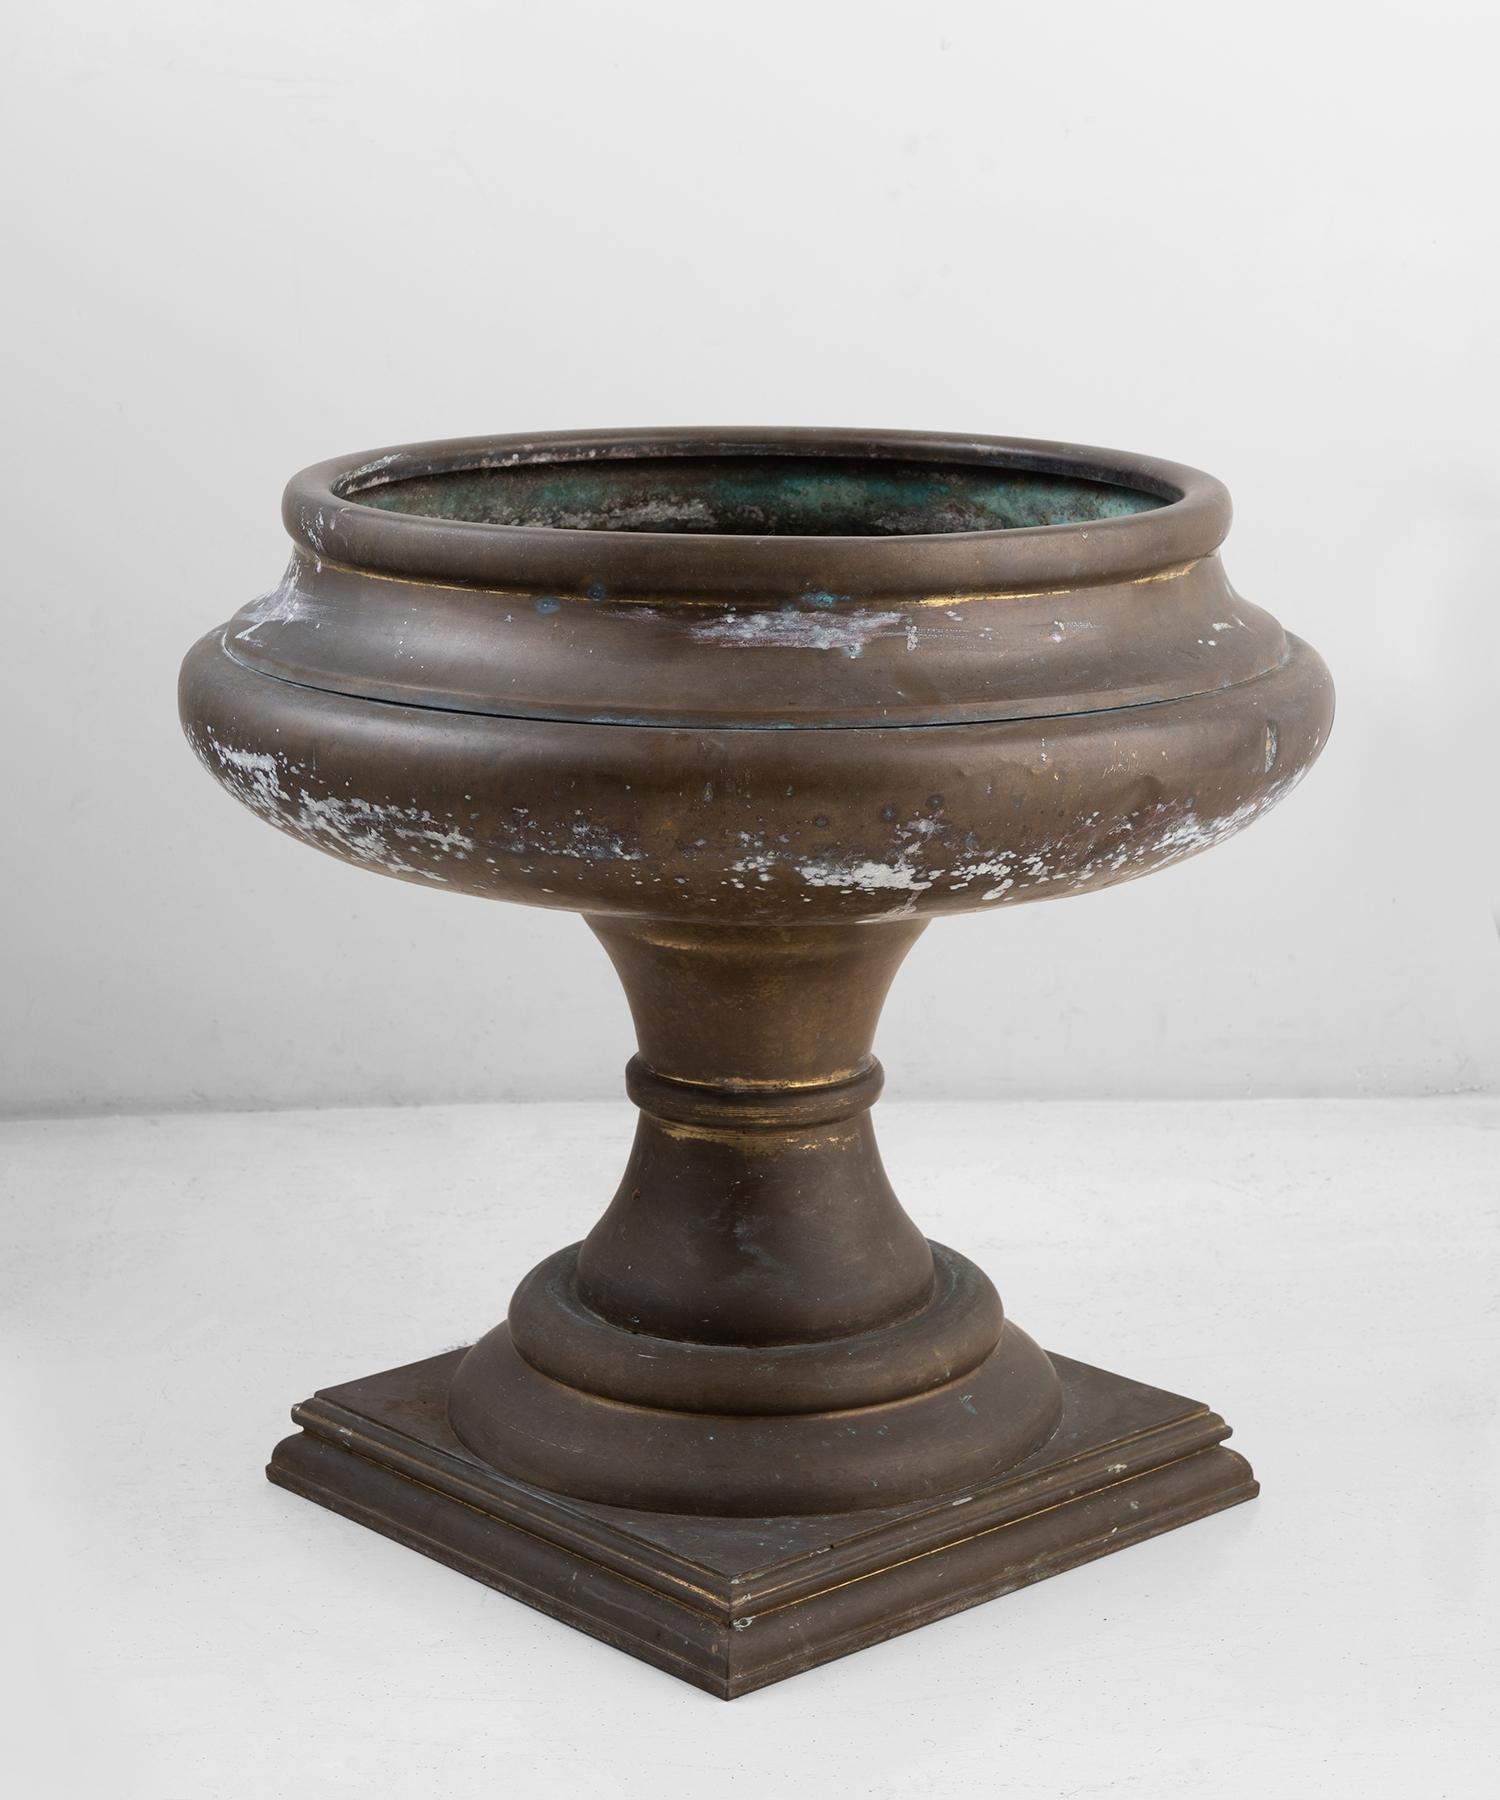 Copper urn, circa 1940.

Large form with patina.